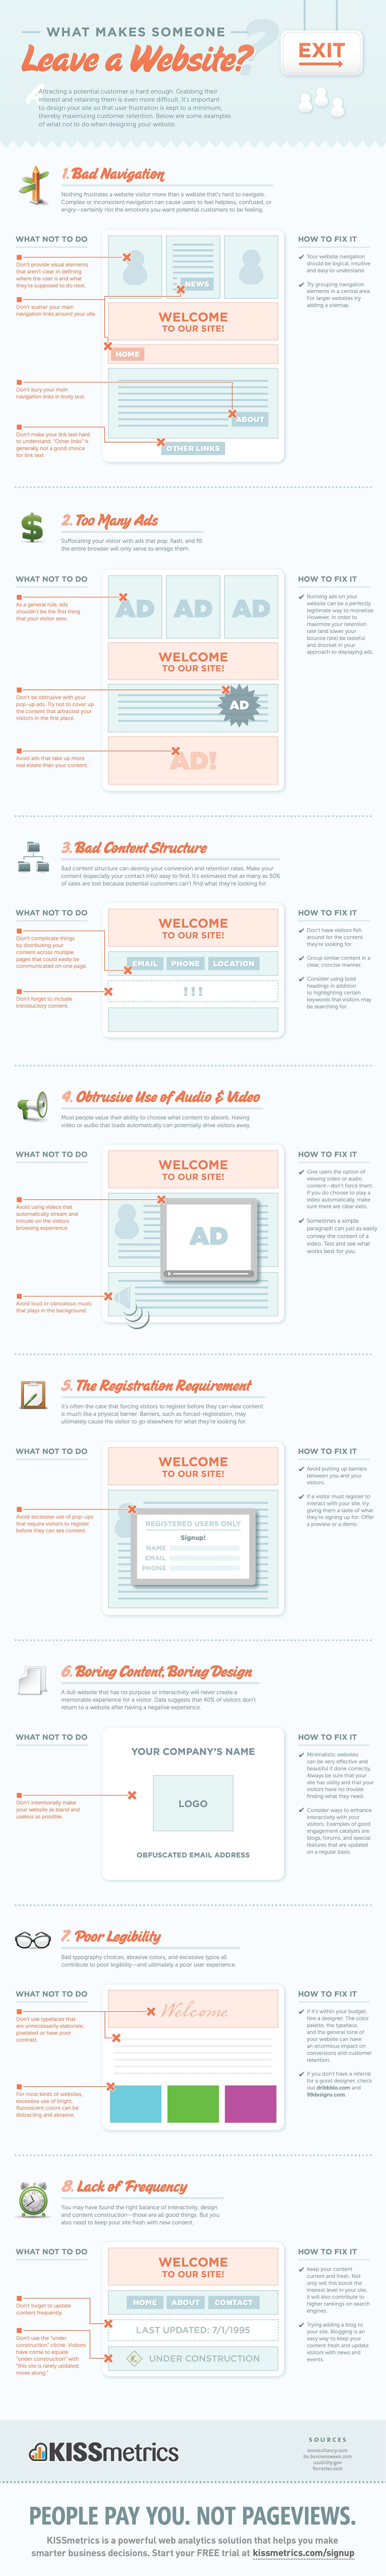 8 Reasons Why People Leave Your Website [Infographic]